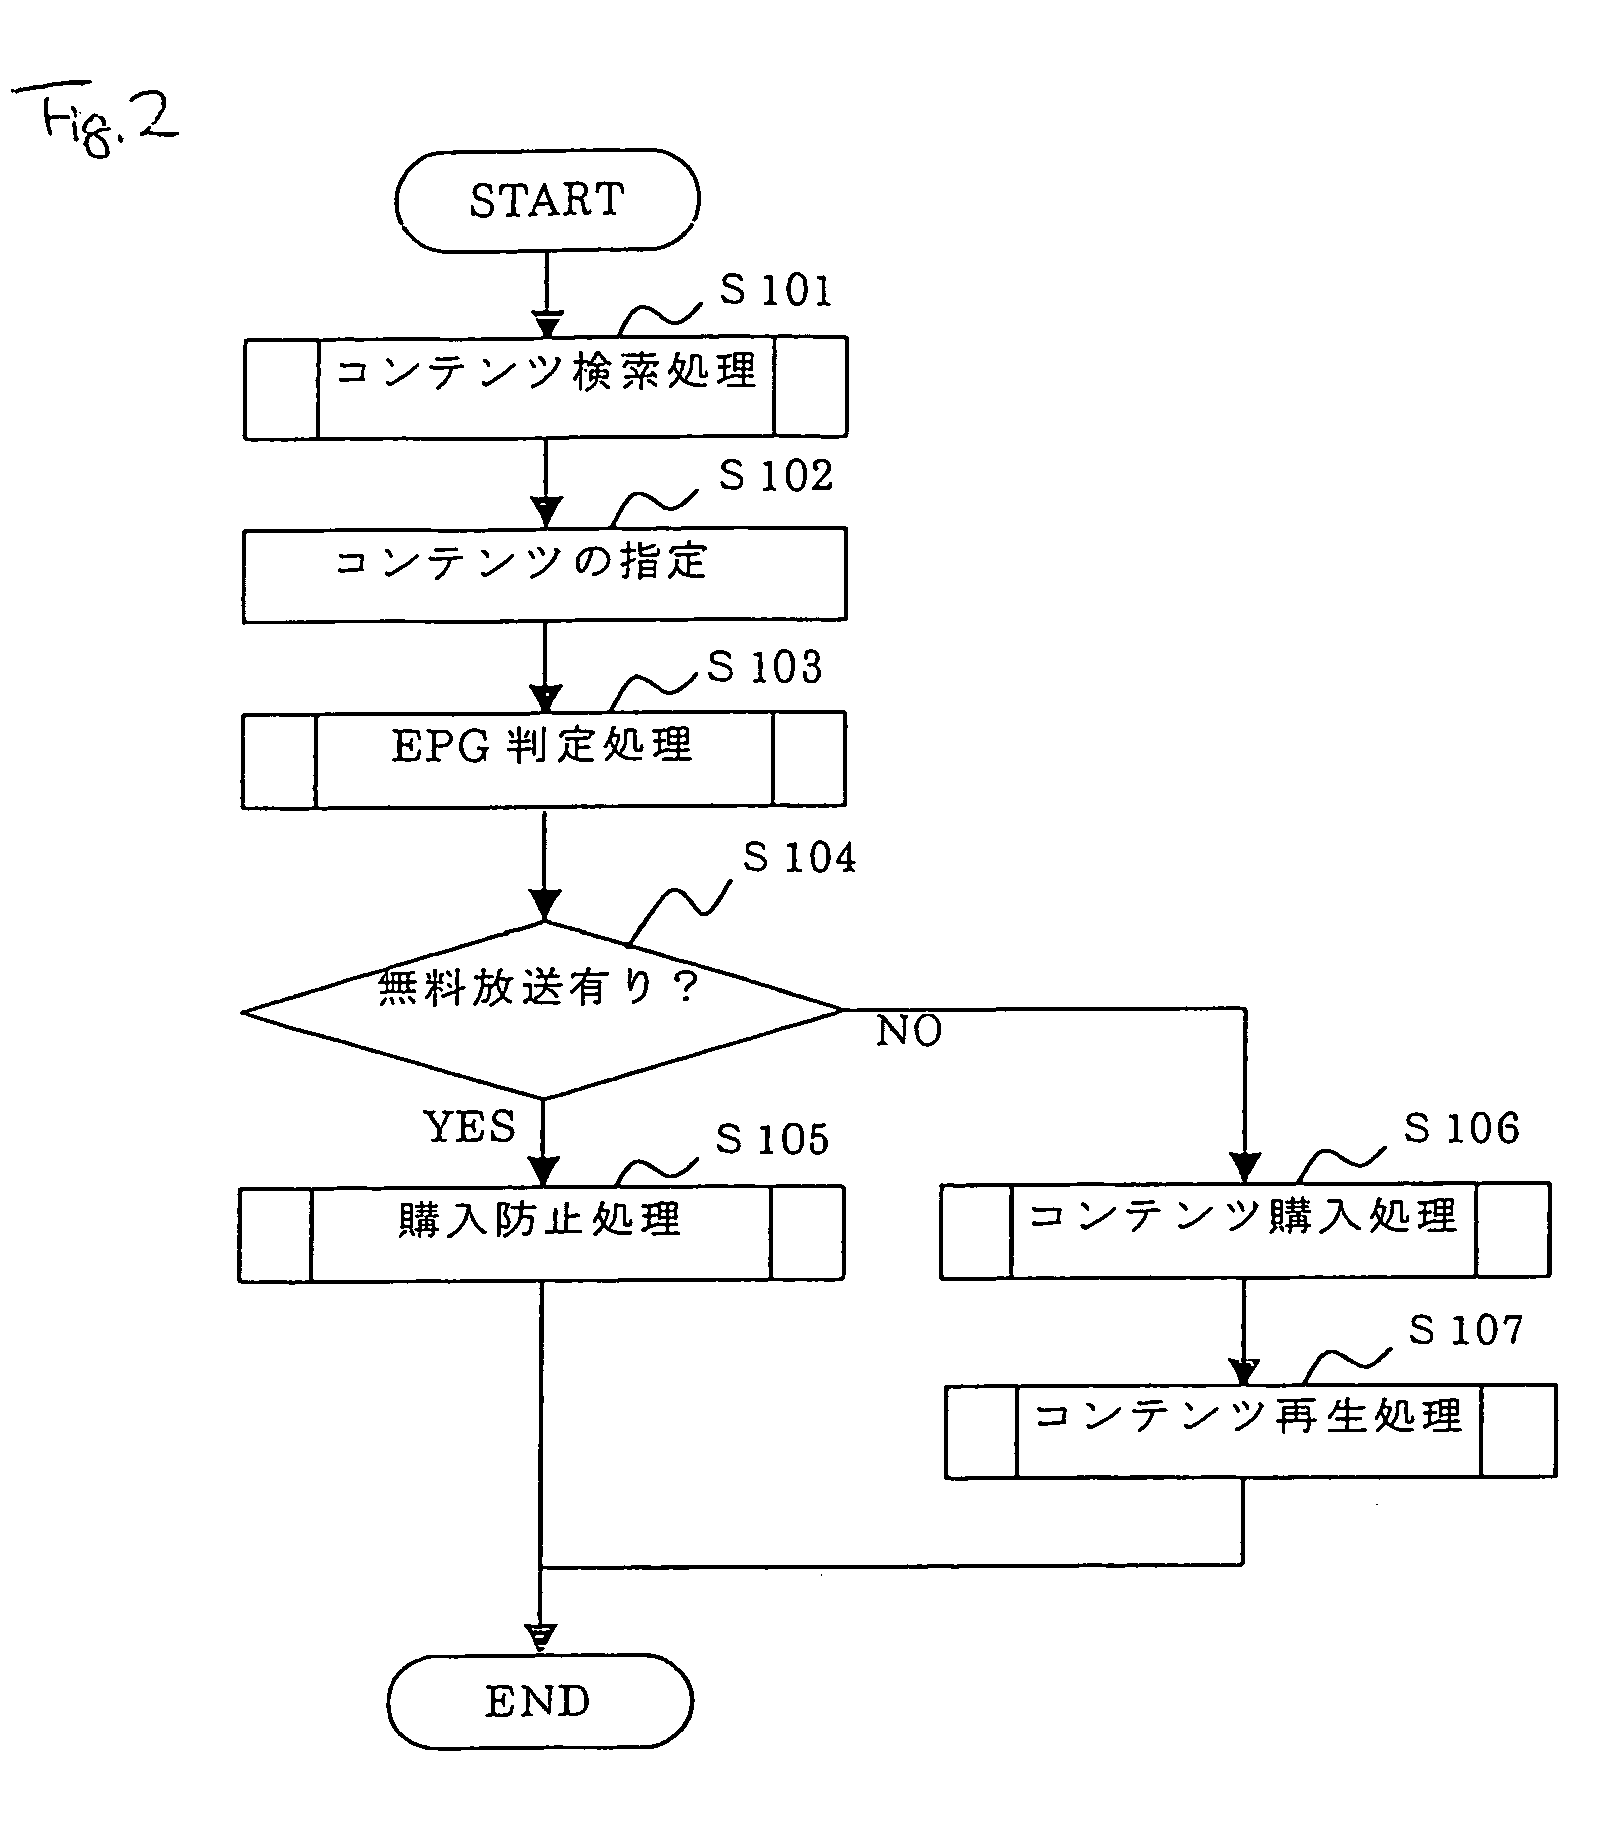 Content purchase support apparatus